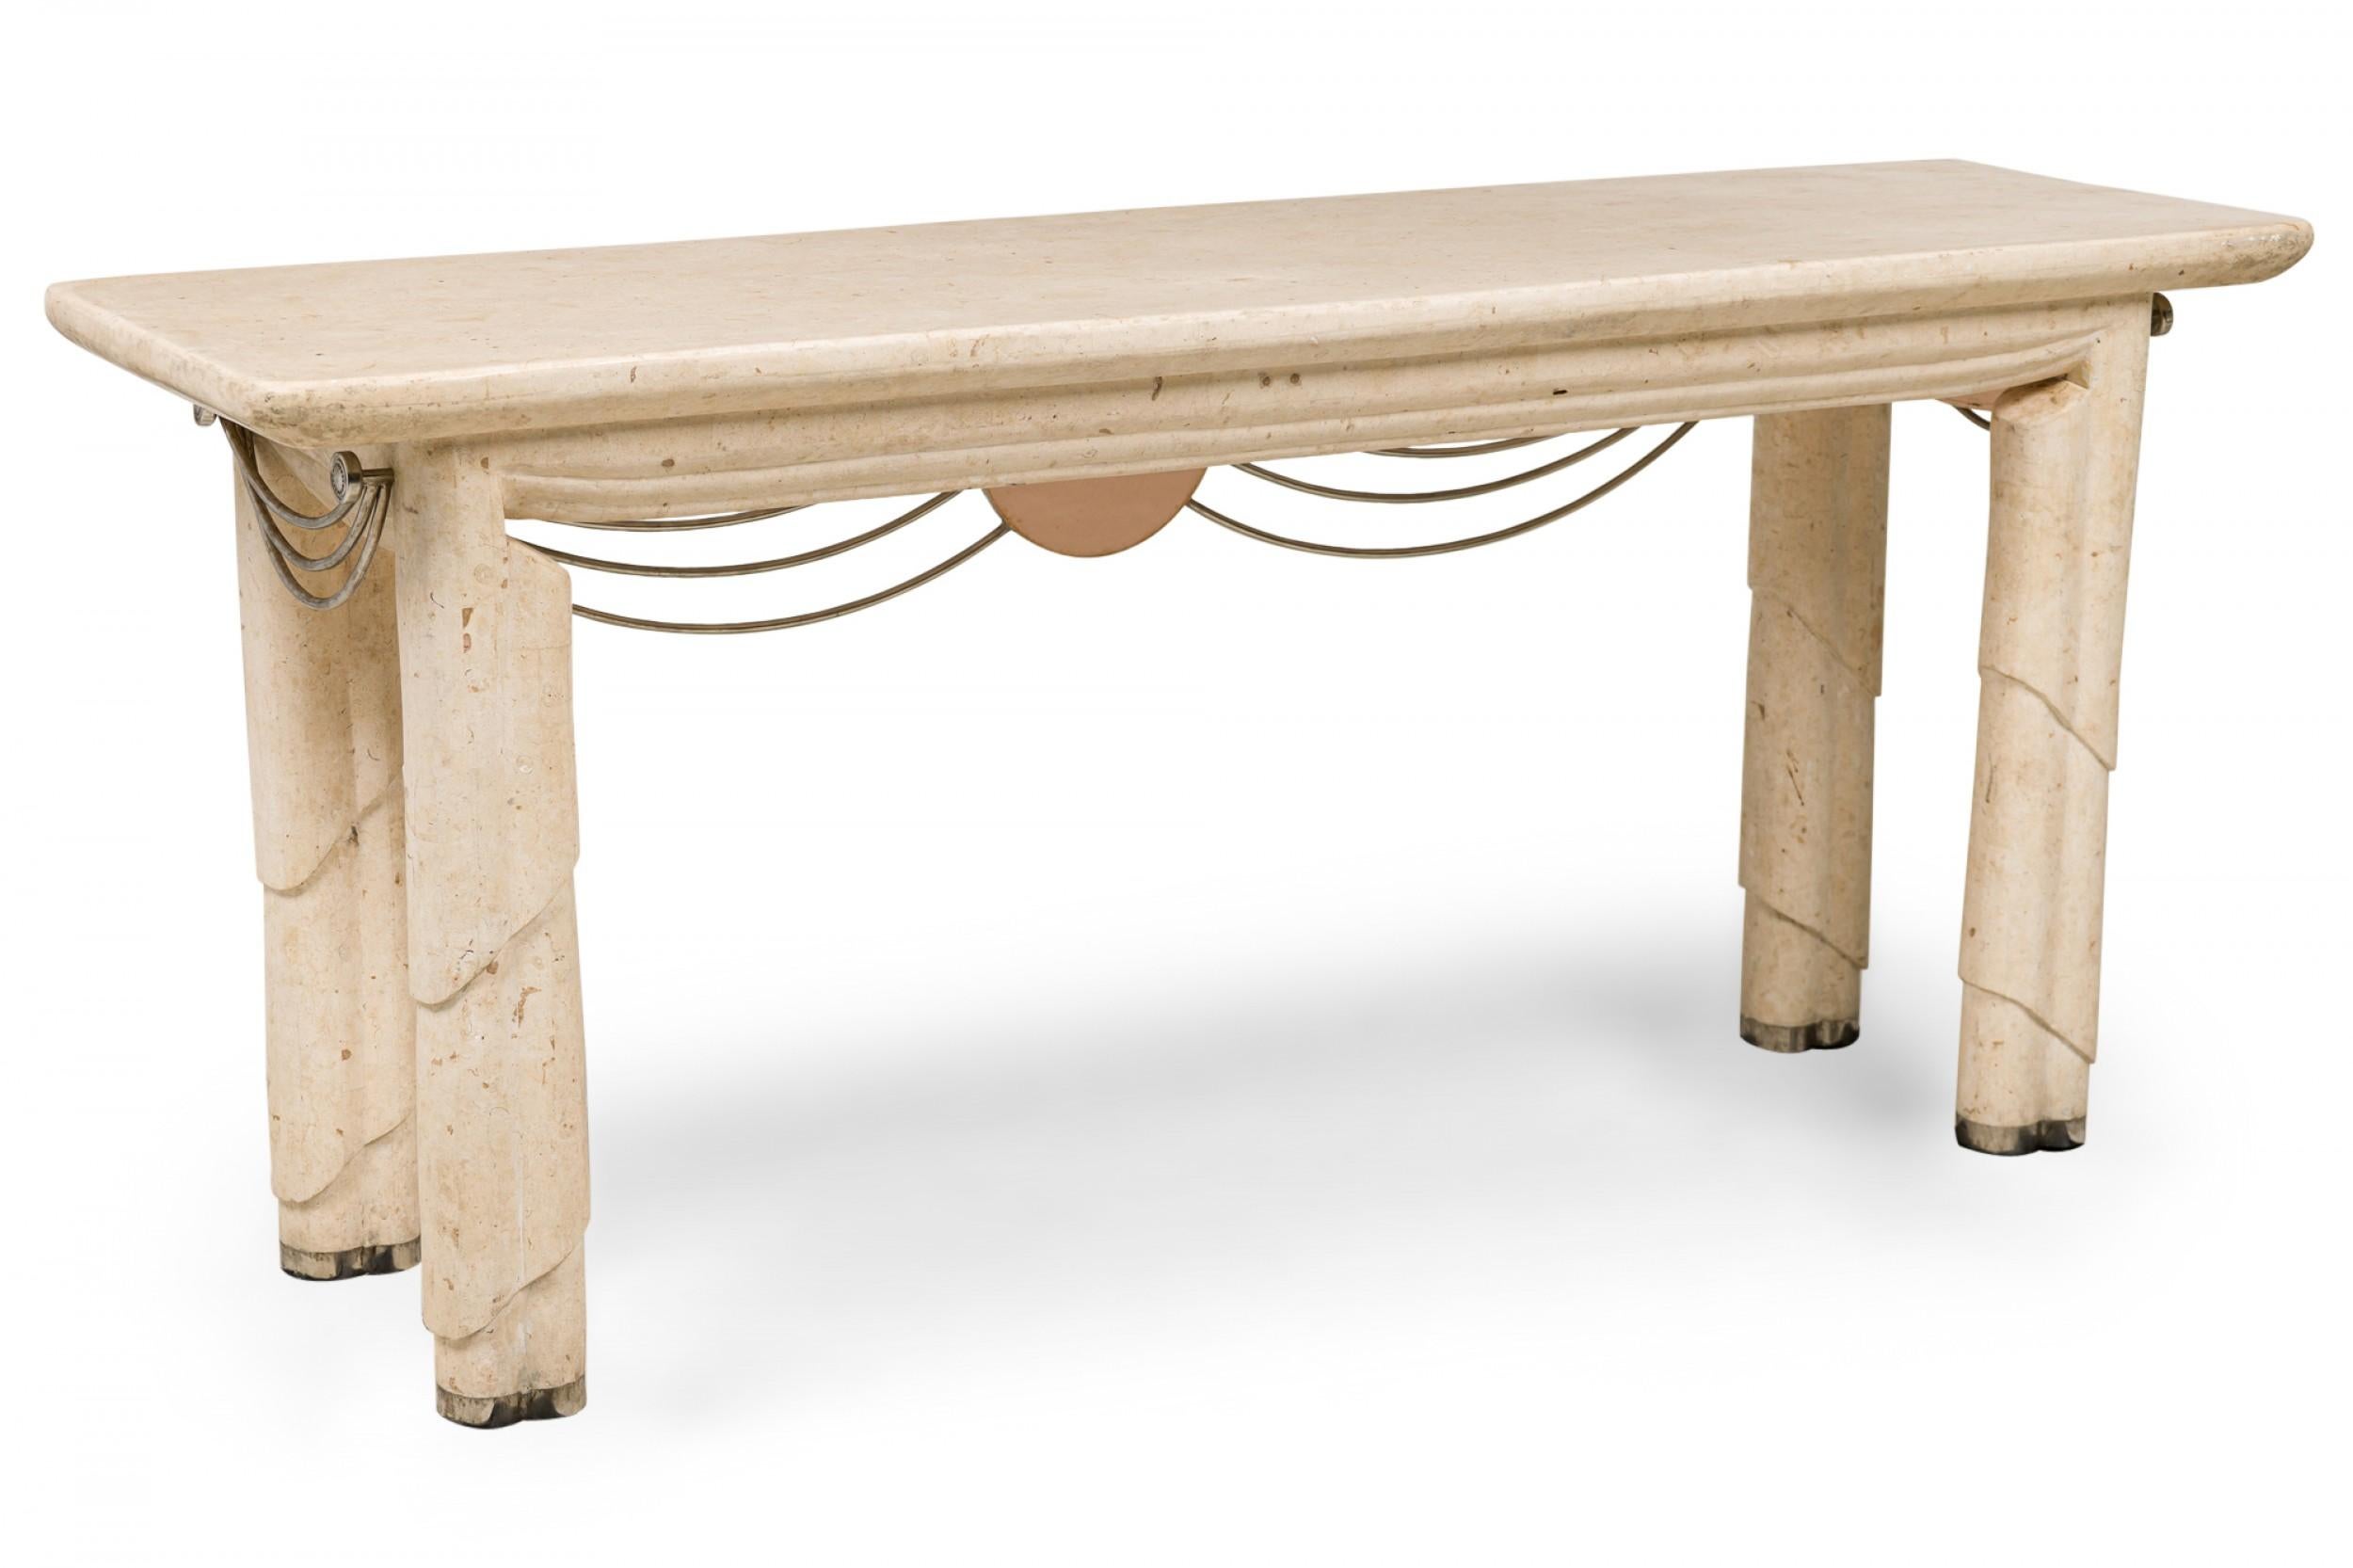 20th Century American Mid-Century Modern Travertine and Nickel Console Table, Maitland Smith For Sale